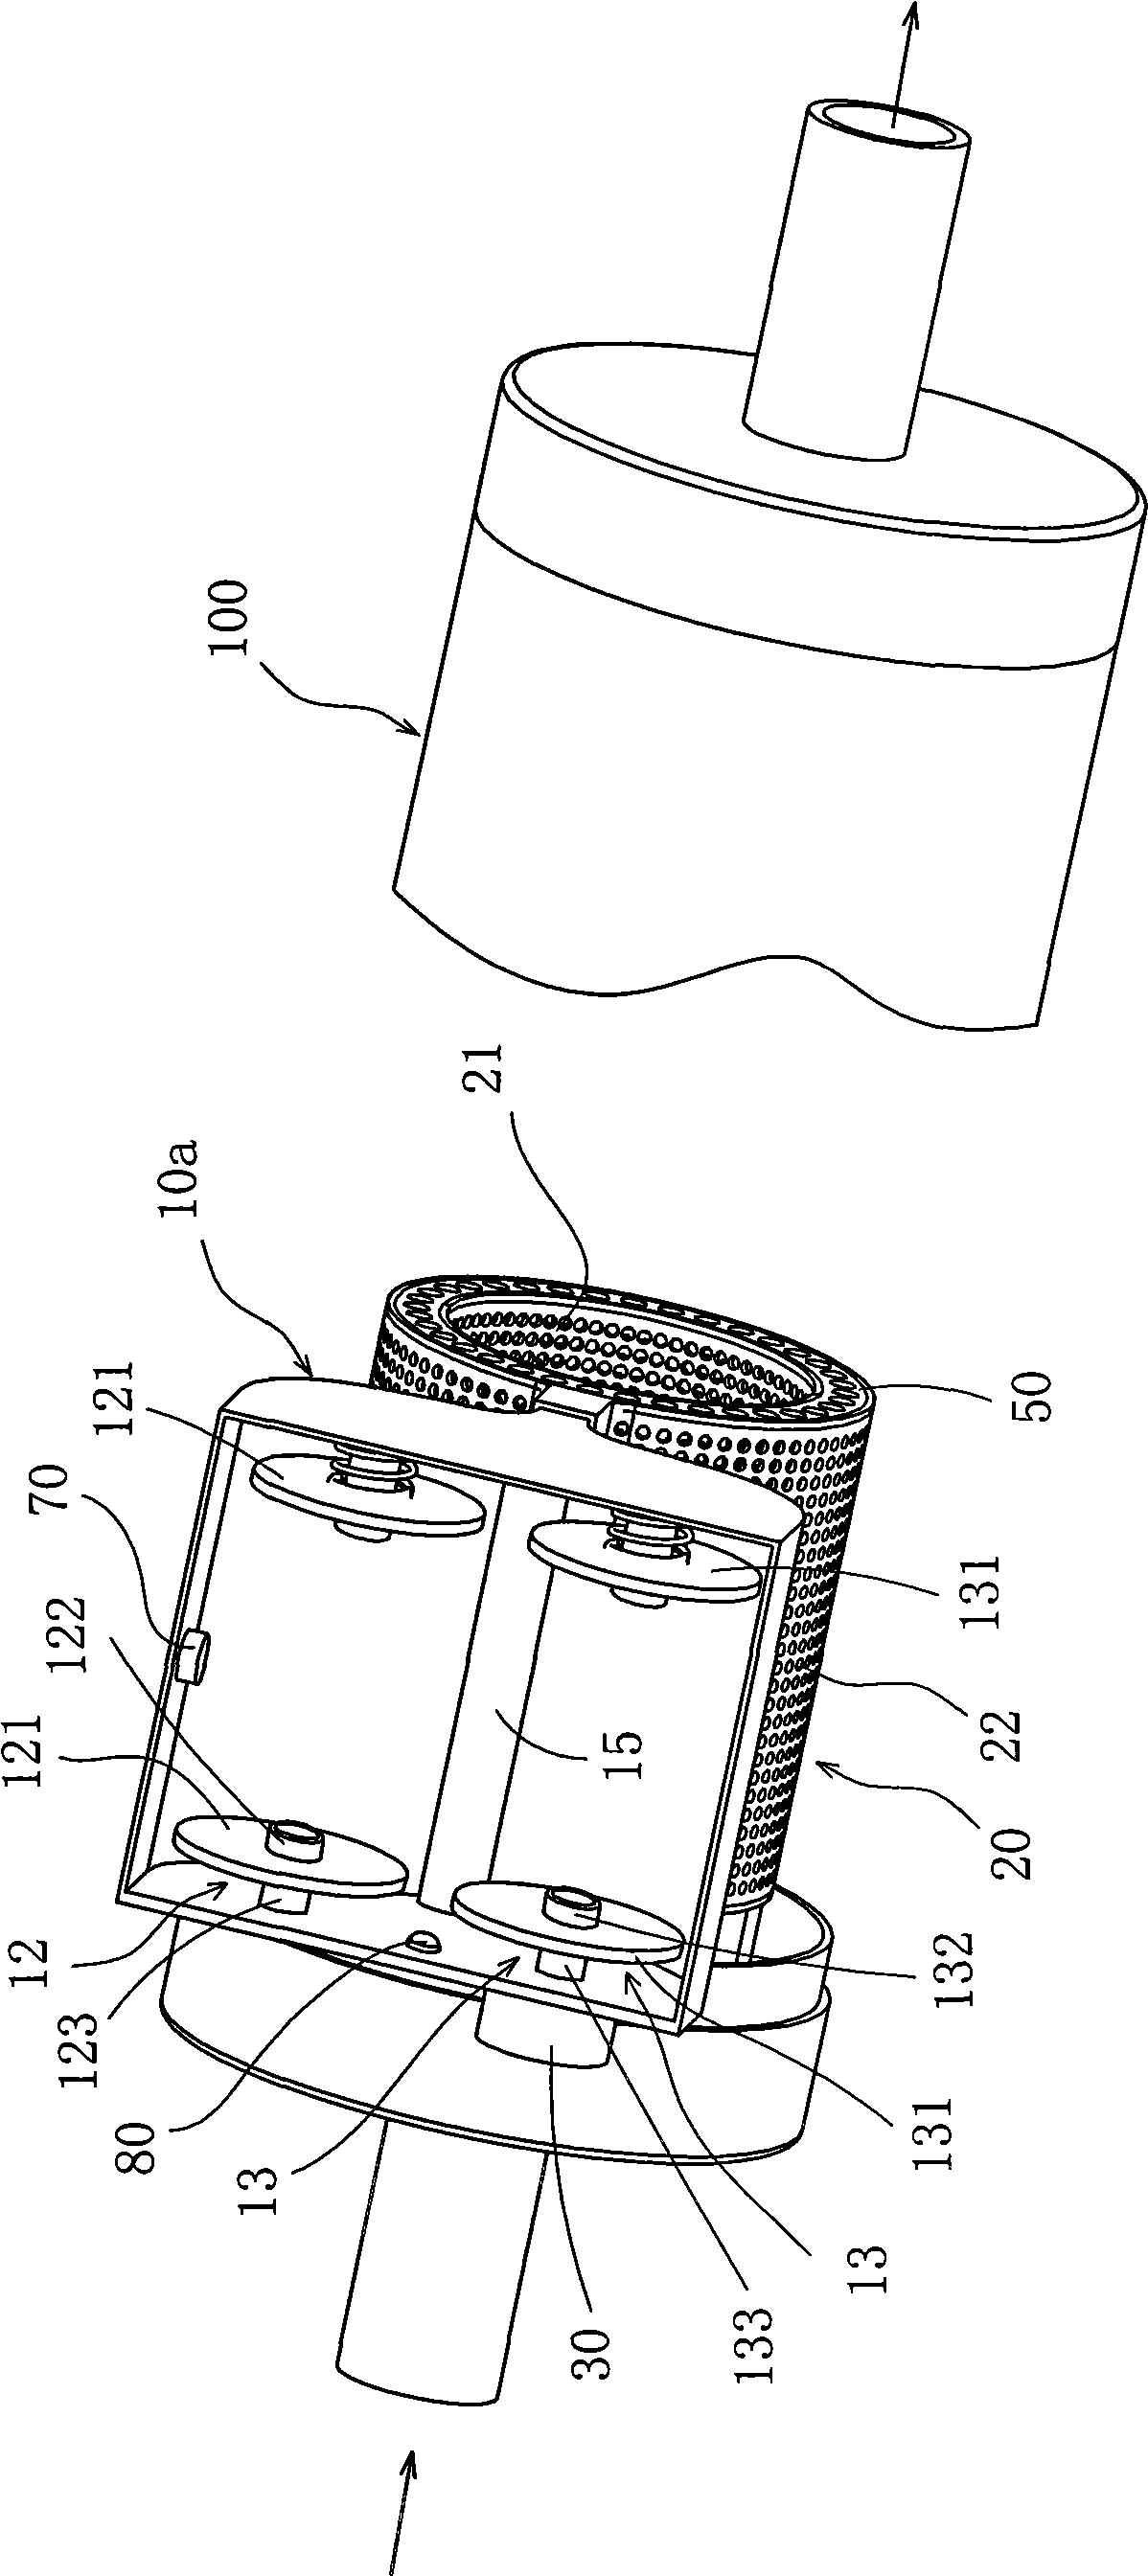 Automobile exhaust purification method and automobile exhaust purification system thereof